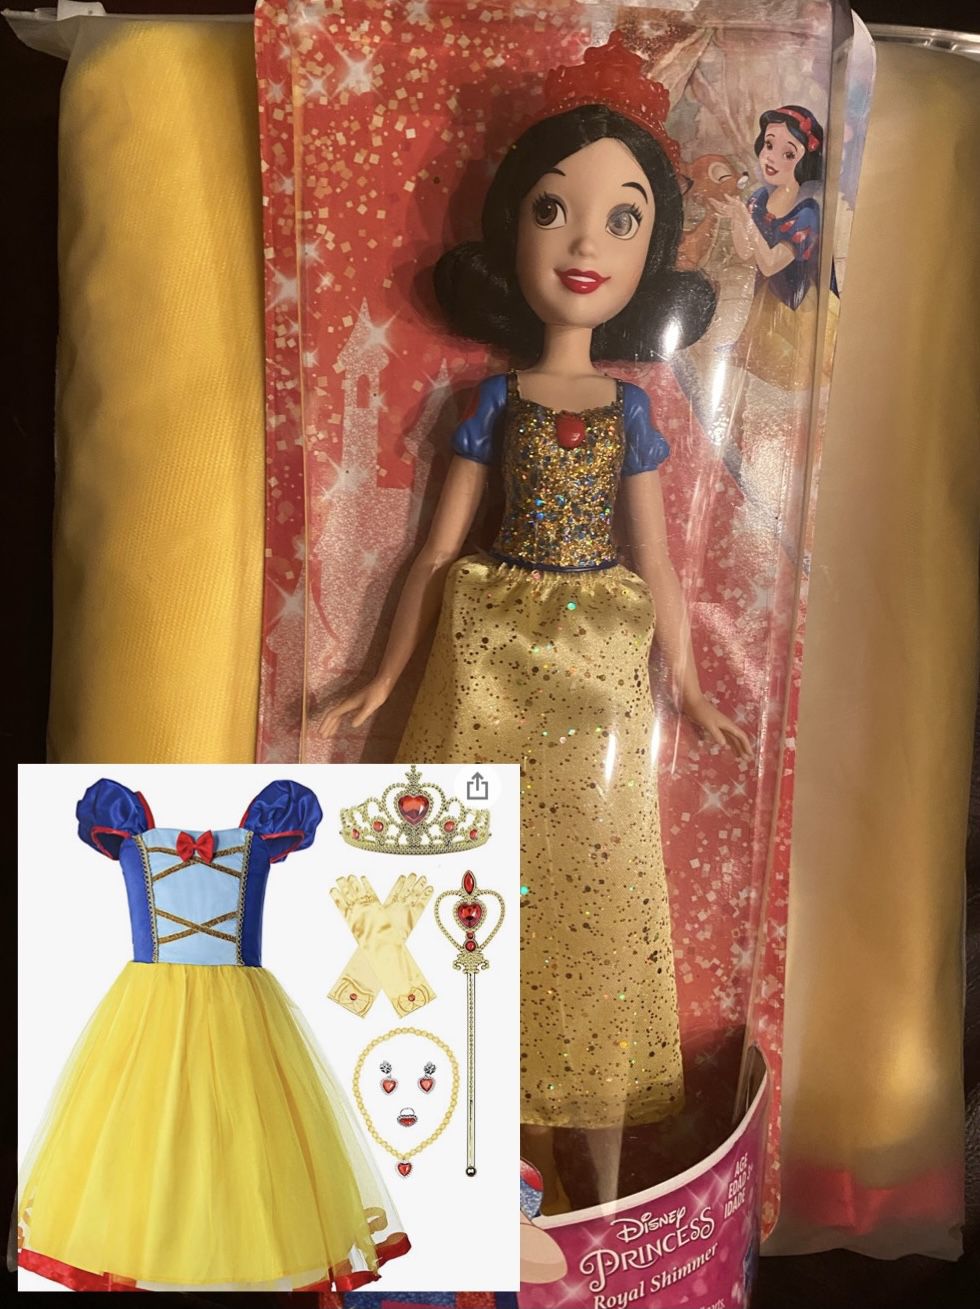 Brand New! Sealed Box Disney Princess Snow White Doll And Dress Up Set Size 8 Complete Tiara Gloves Wand Jewelry + Costume Holiday Gift Royal Shimmer 